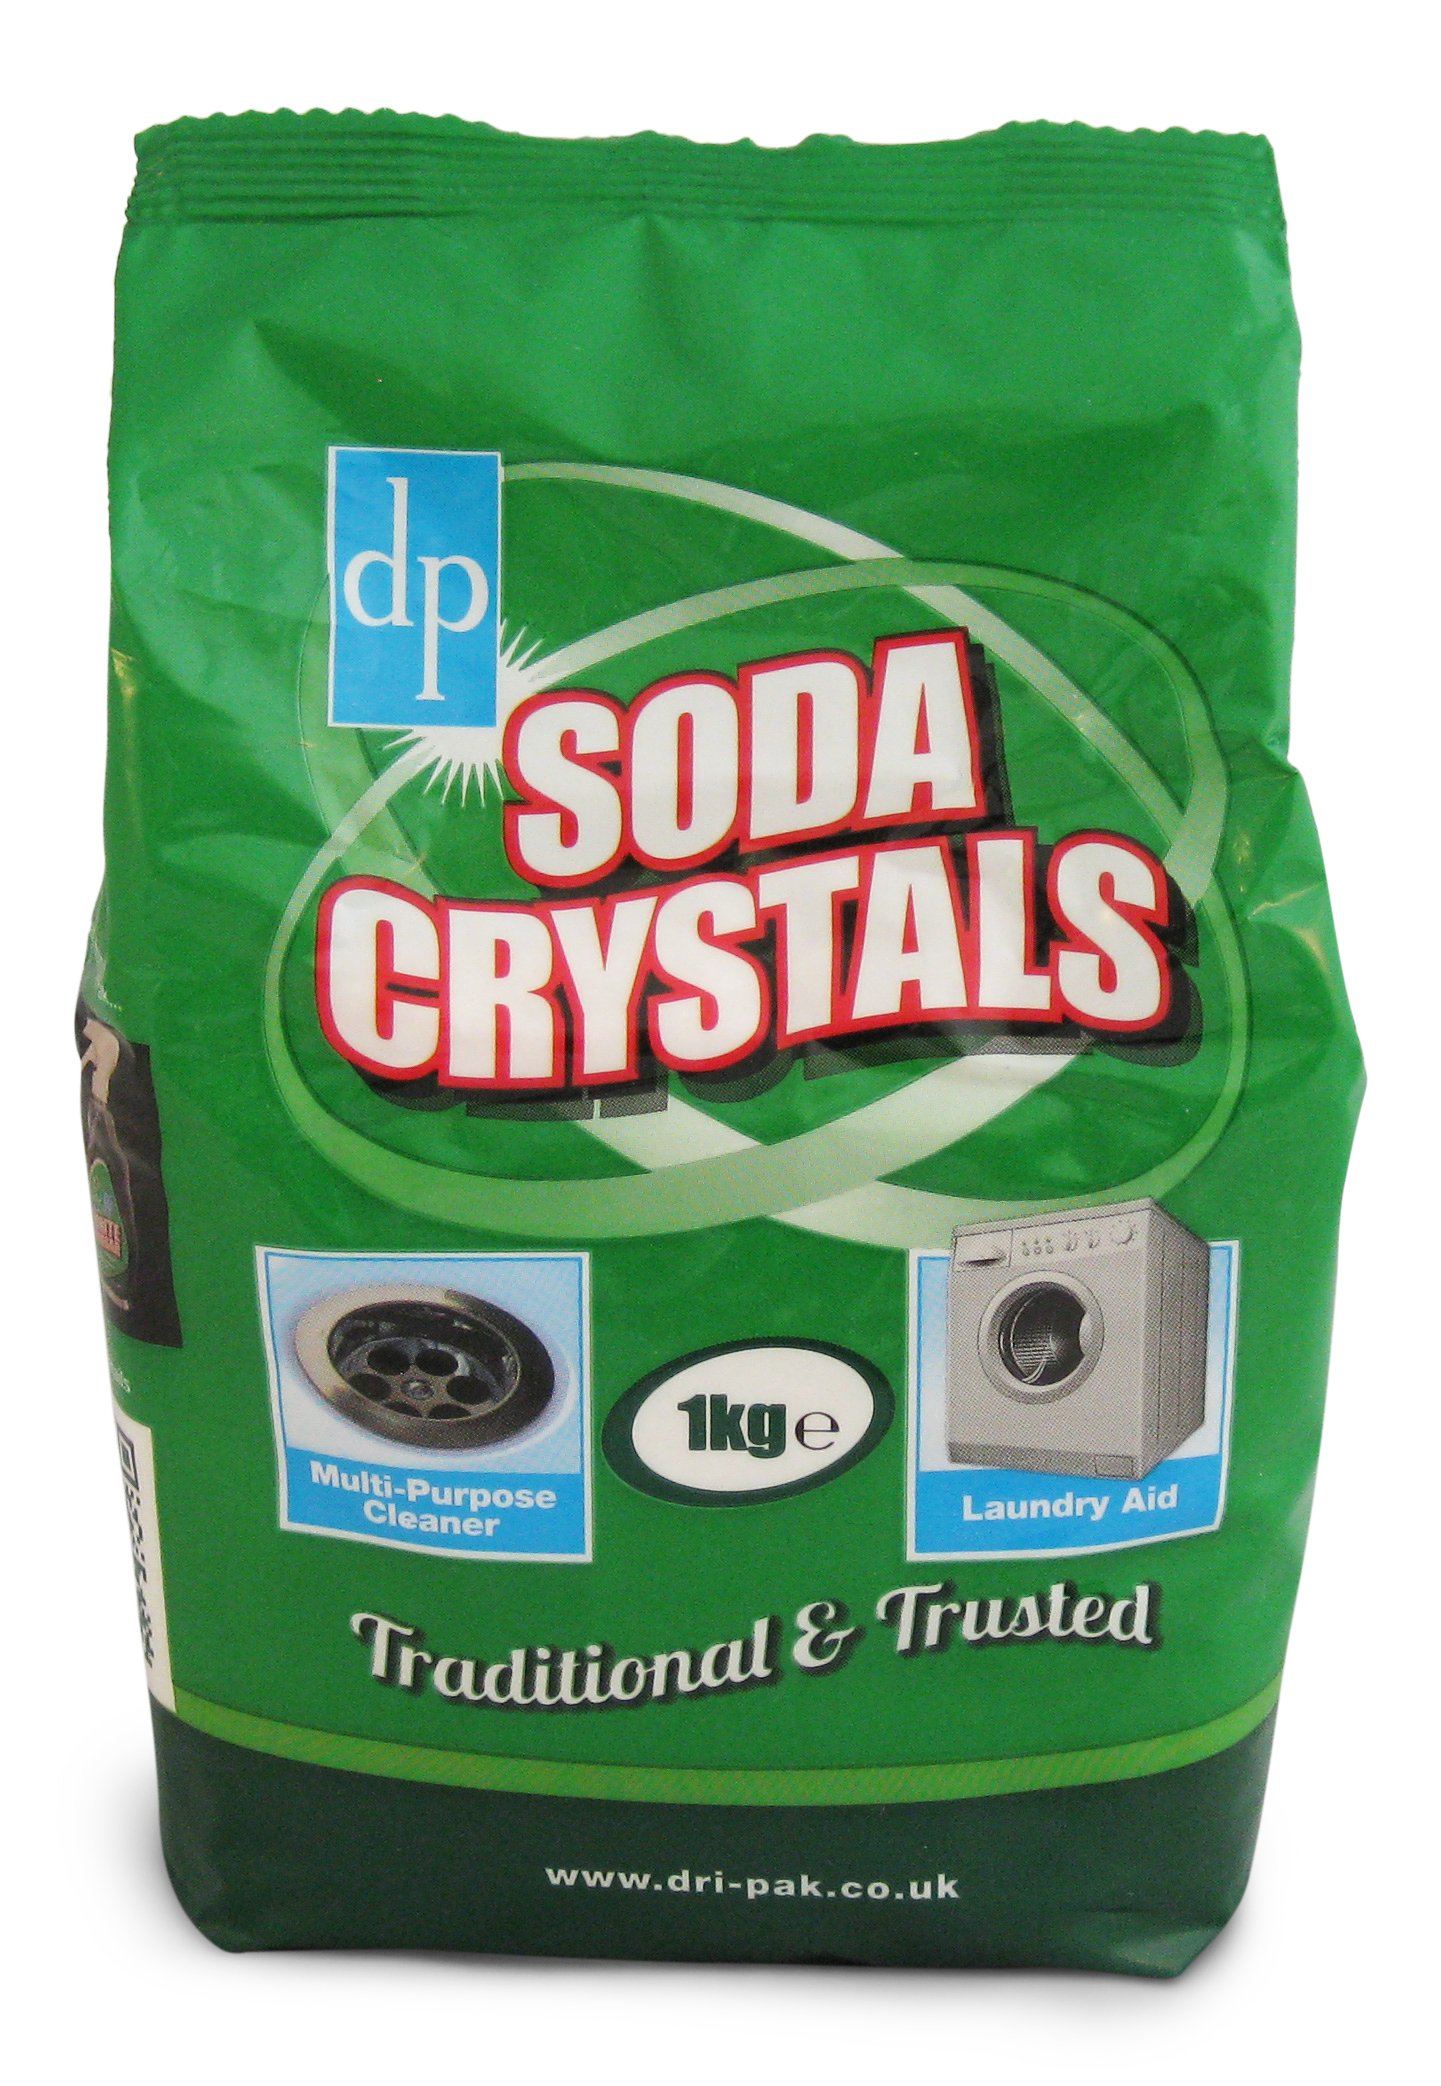 Picture of 1kg bag of Dri-Pak Soda Crystals